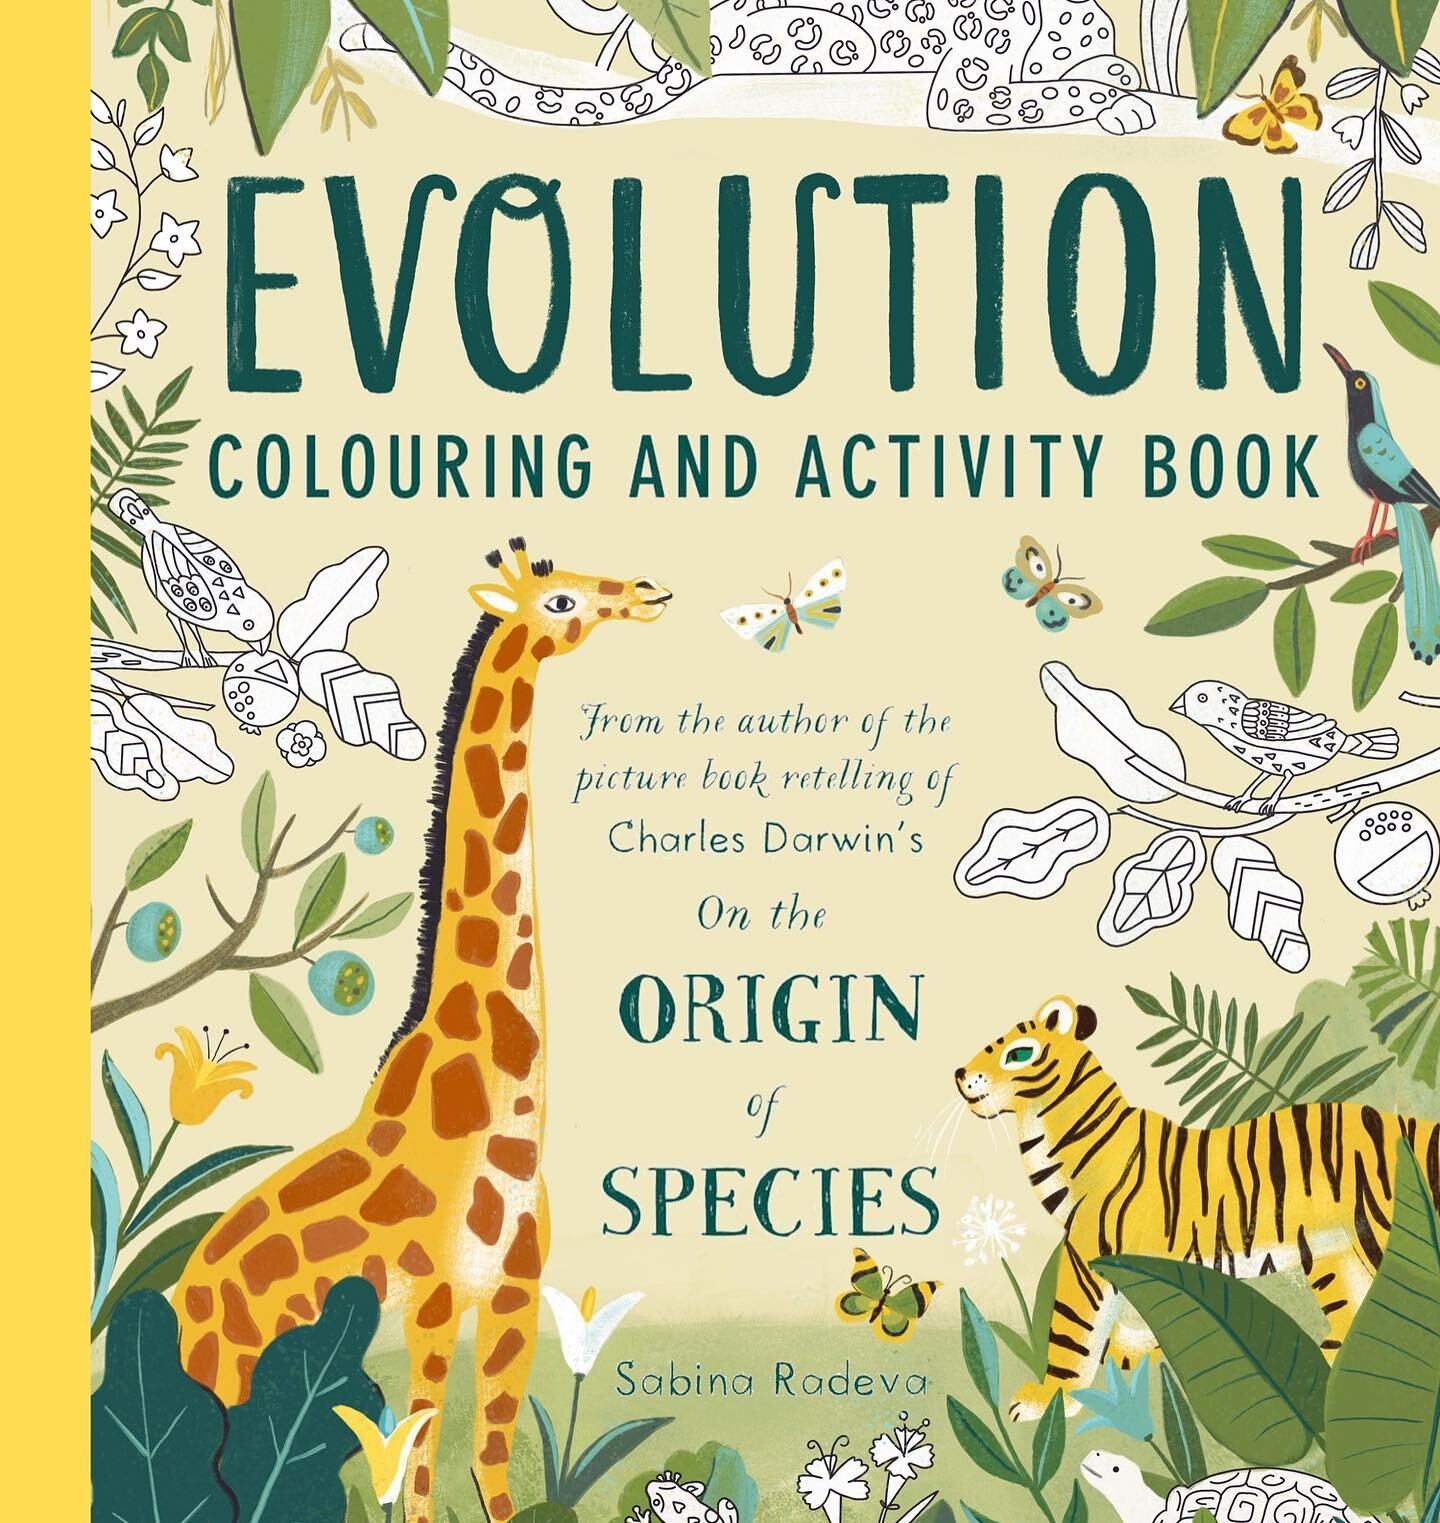 Coming soon! Evolution colouring and activity book. The companion to the picture book On the Origin of Species is coming this fall. Lots of fun activities and mindful colouring pages for kids (and grown-up kids at heart). #kidlit #evolution #activity